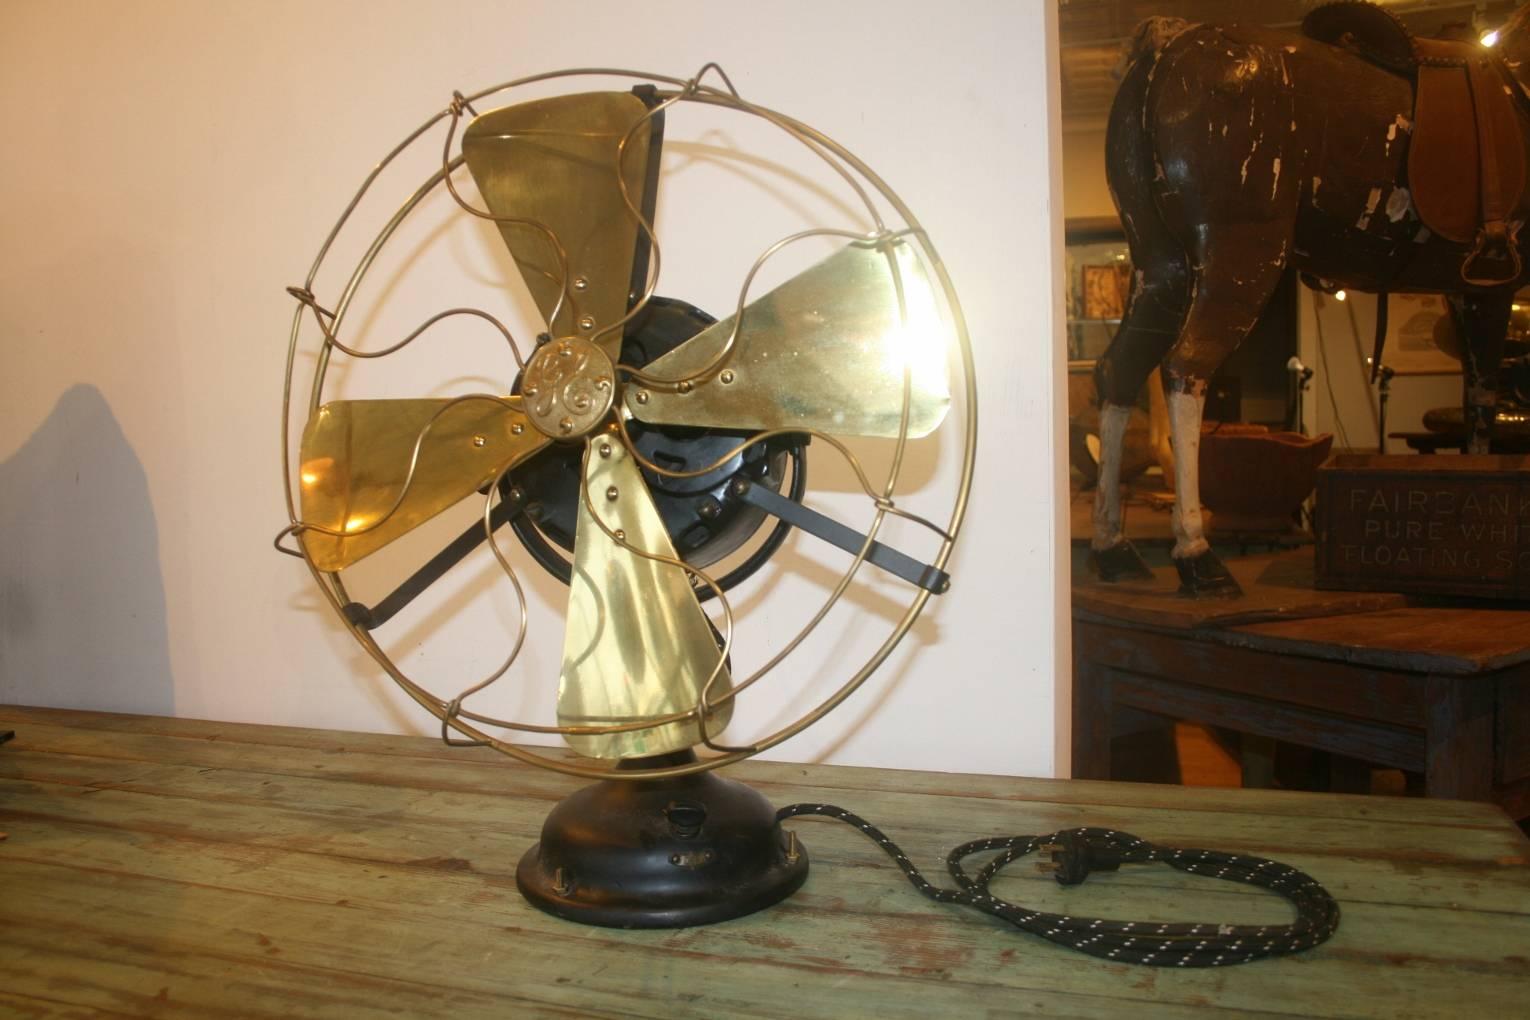 Beautiful Early G.E. Electric Fan.  All brass blades and cage. The motor has been completely refurbished, Perfect for the anti air conditioning person and who likes the early electric/industrial look.  